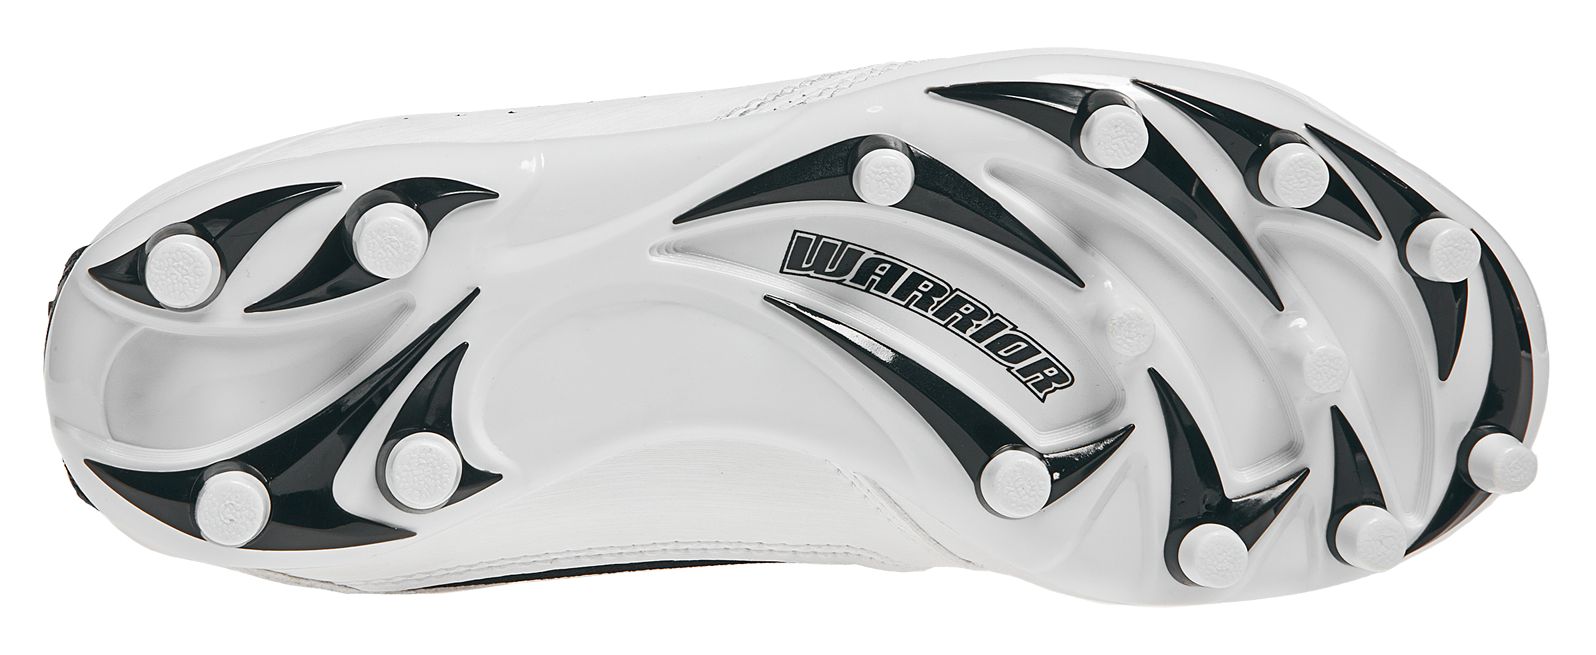 Youth Burn Speed Jr. 5.0 Cleat, White with Black image number 5